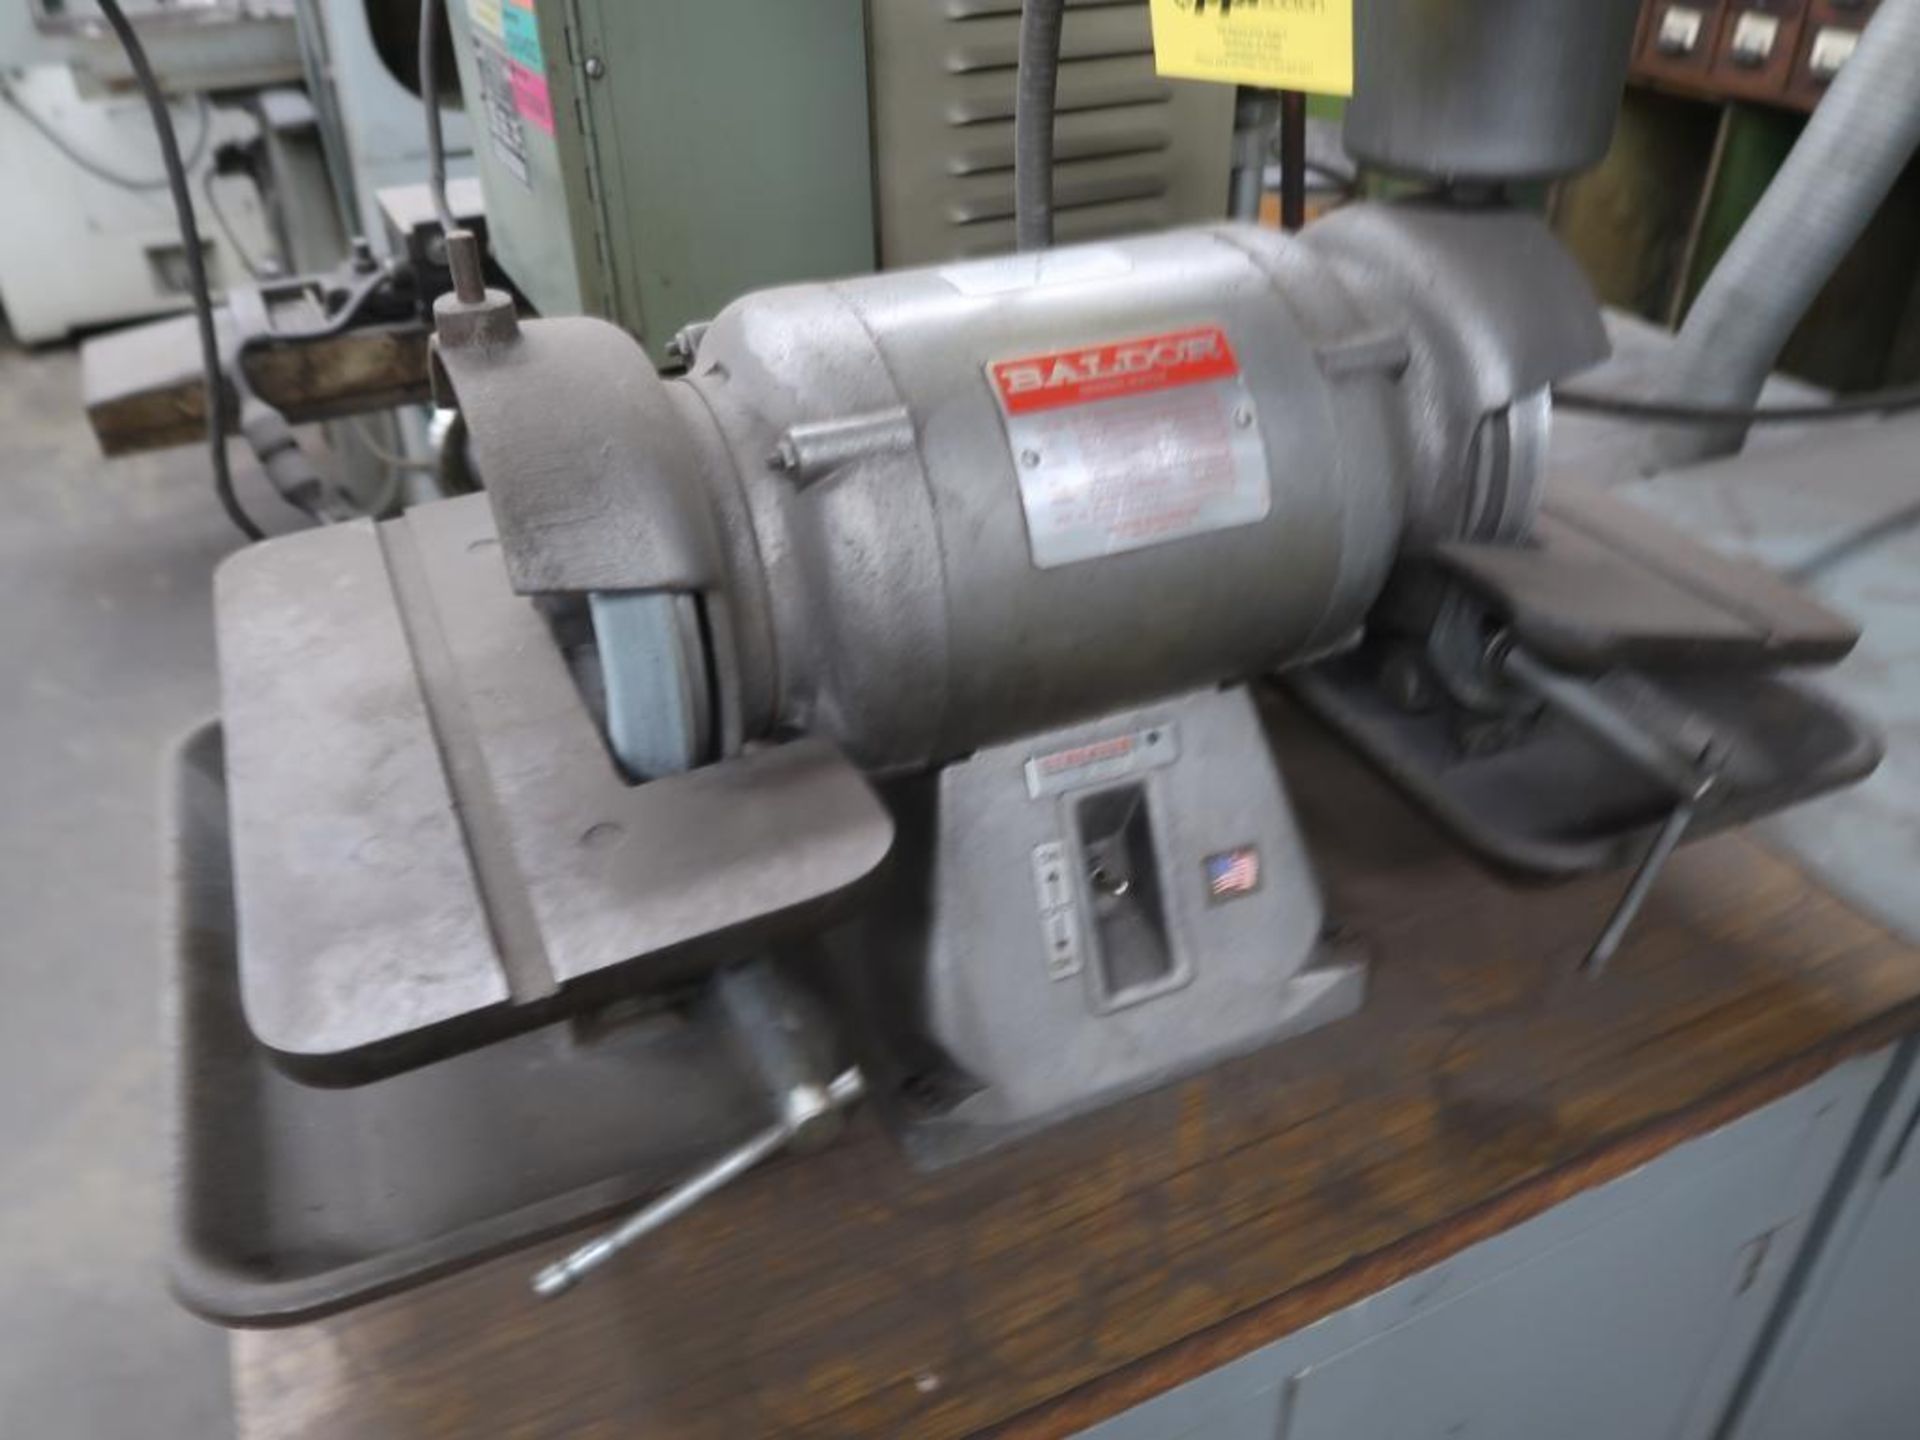 LOT: 6 in. Double End Tool Grinder, with (2) Cabinets (#1749), LOCATION: TOOL ROOM